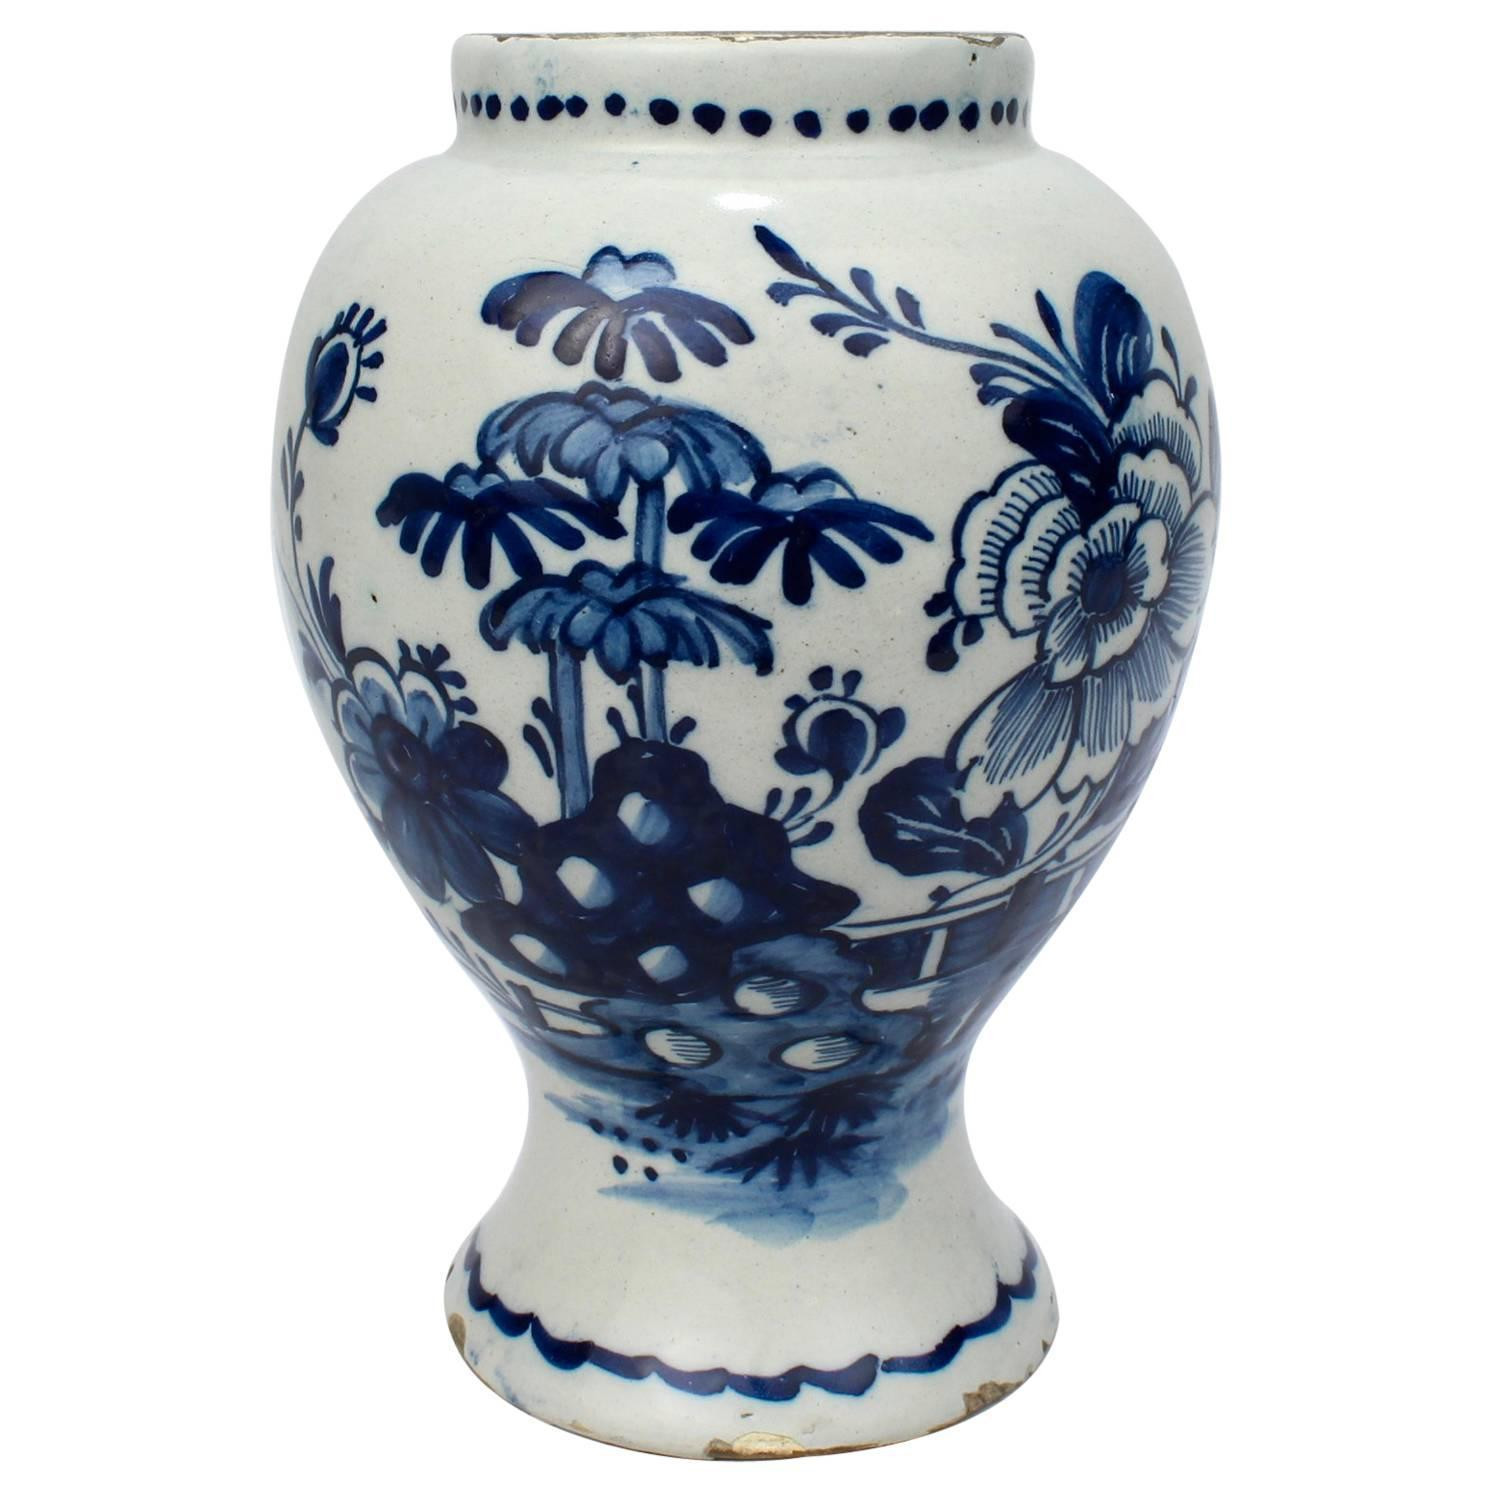 21 Unique Hand Painted Delft Holland Bud Vase 2023 free download hand painted delft holland bud vase of ginger jar shaped vase in celery and rough sand glaze for sale at in ginger jar shaped vase in celery and rough sand glaze for sale at 1stdibs